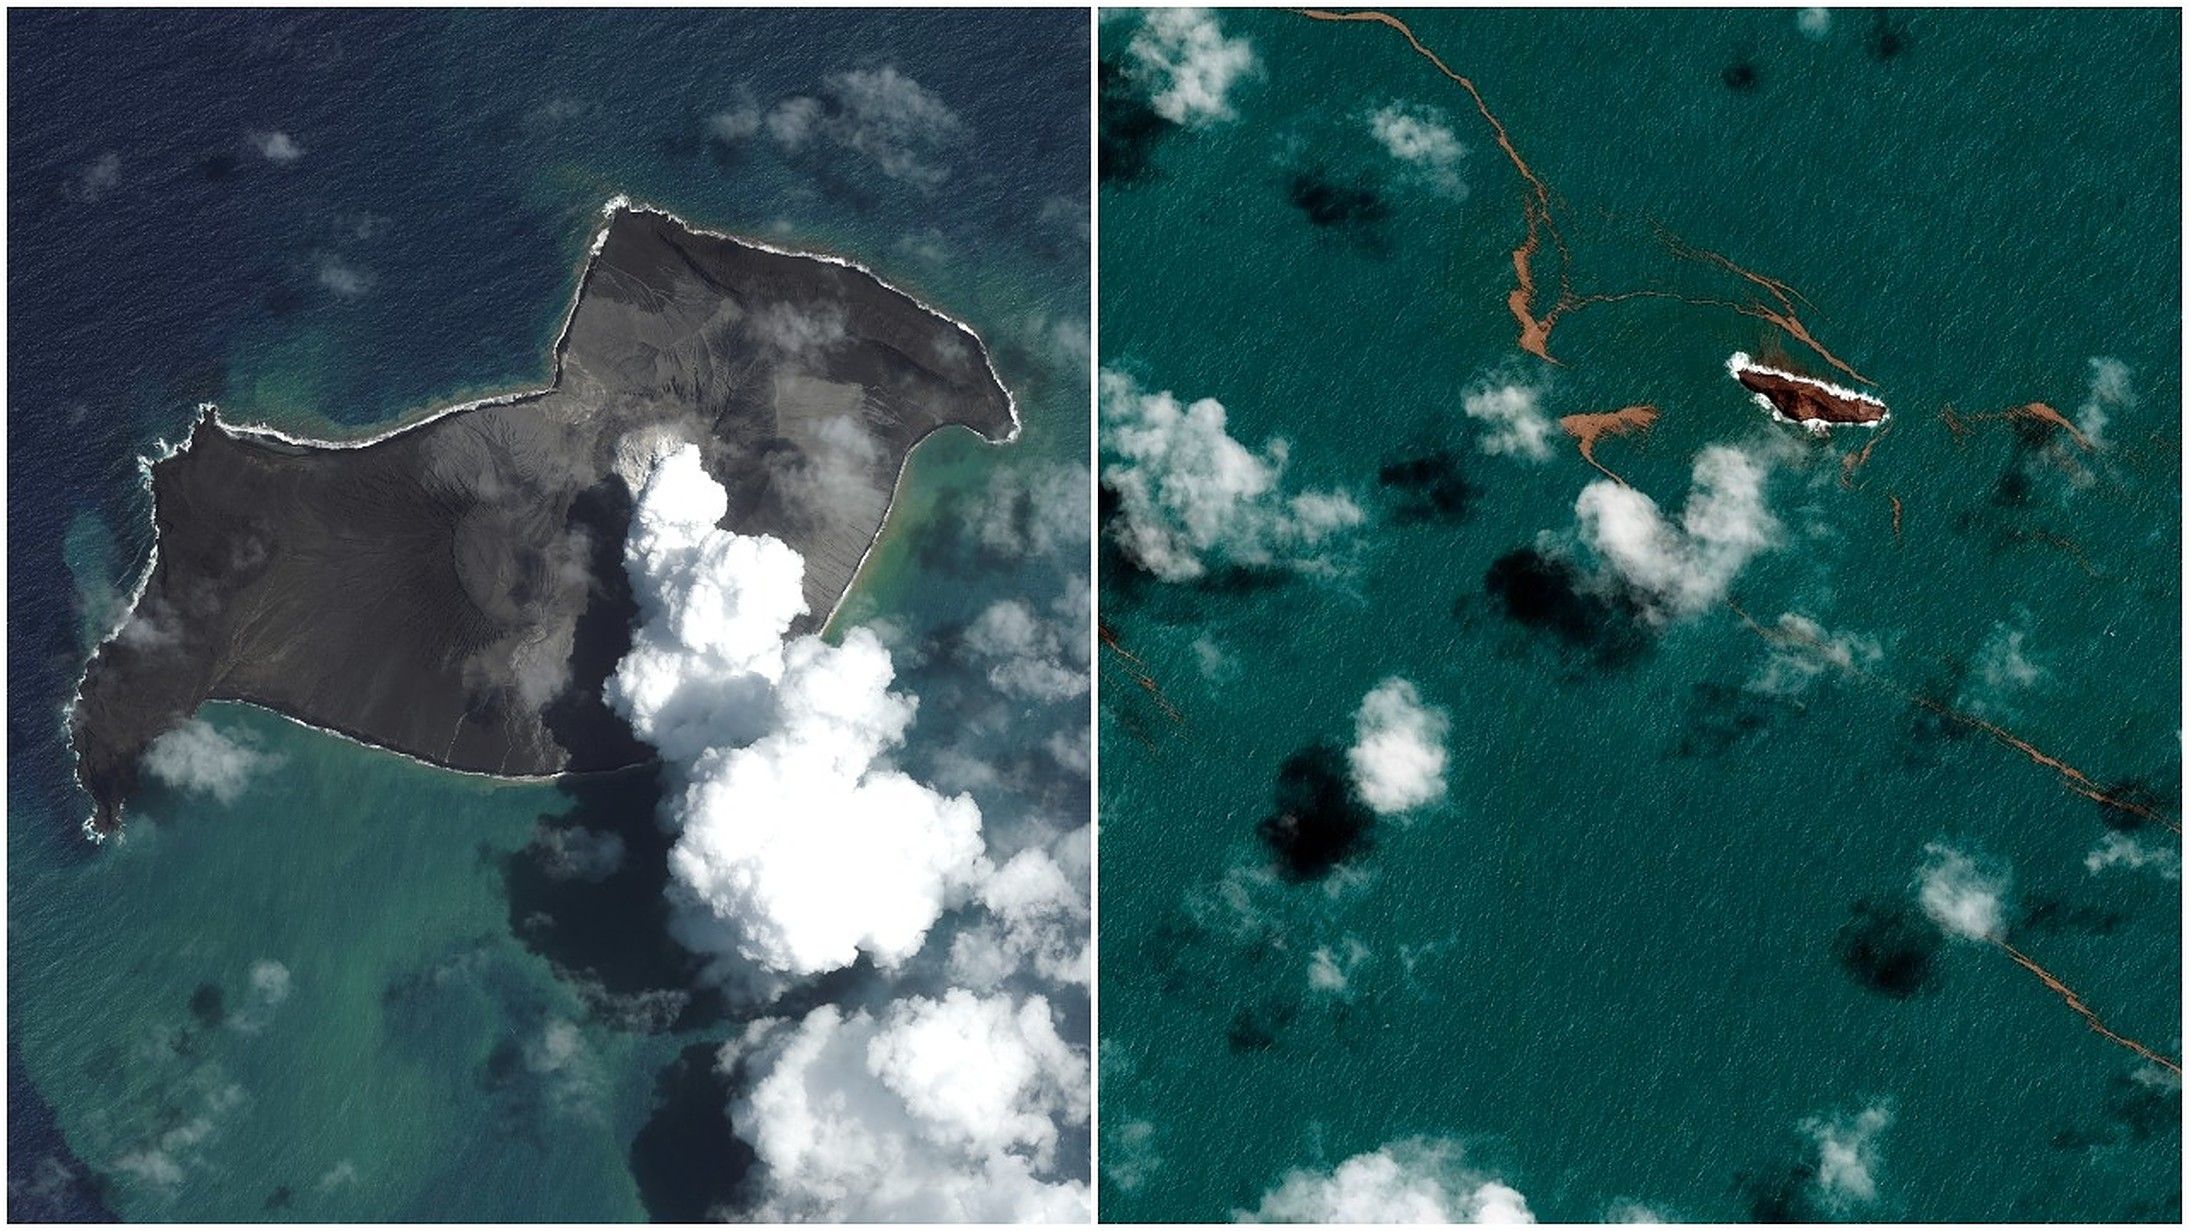 Left, an overview of Tonga's volcano on Jan. 6. Right, the volcano seems to have all but disappeared on Jan. 18.